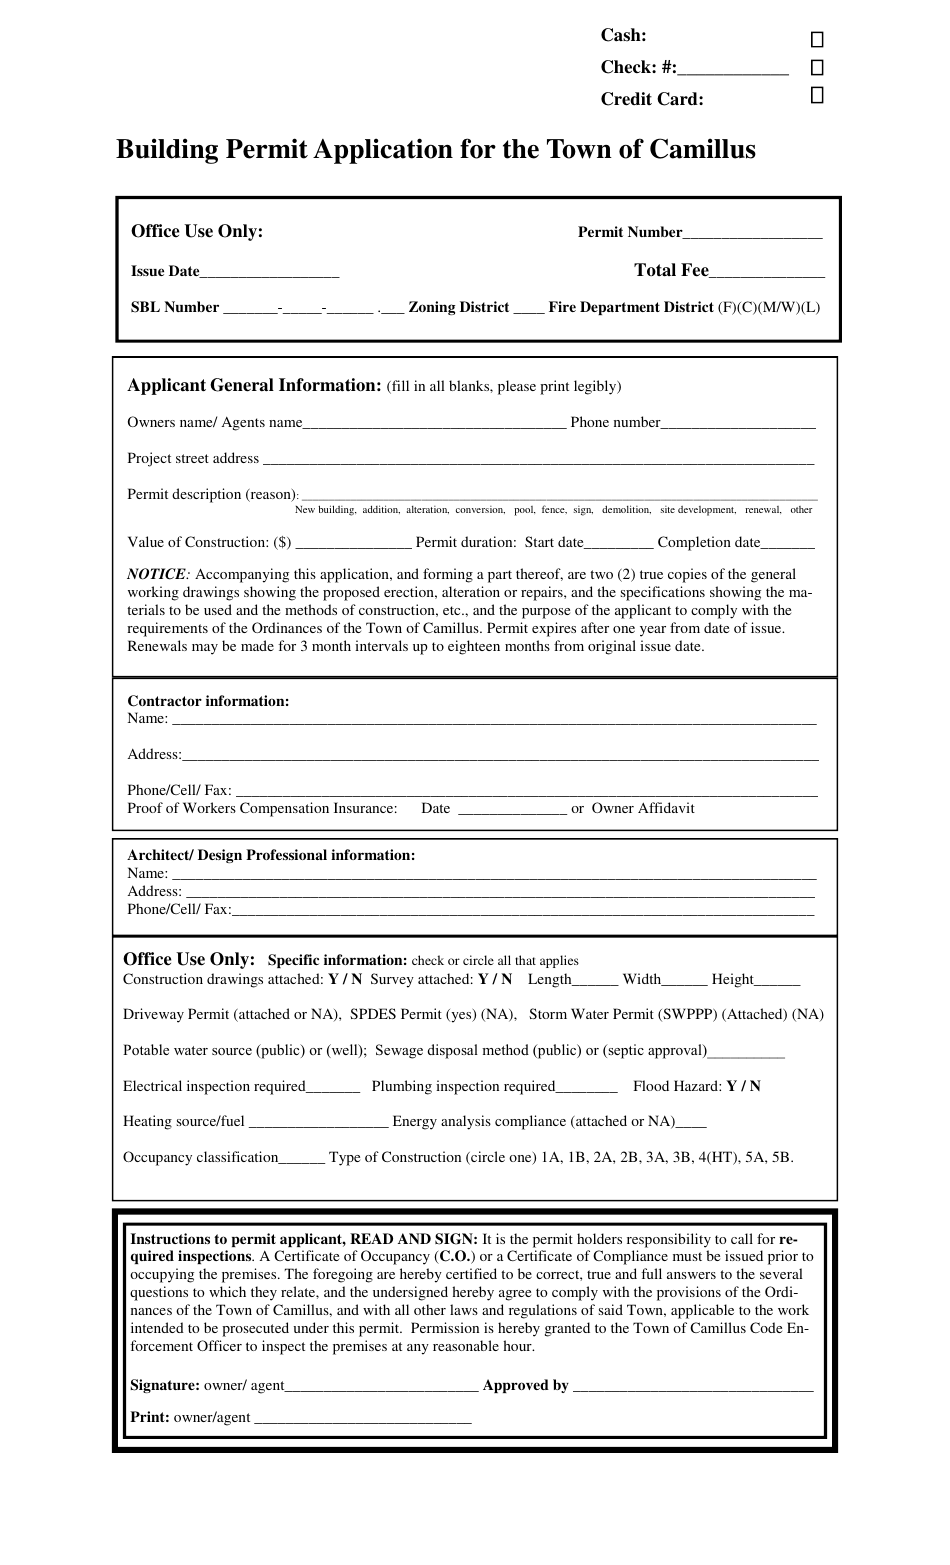 Building Permit Application Form - Town of Camillus, New York, Page 1